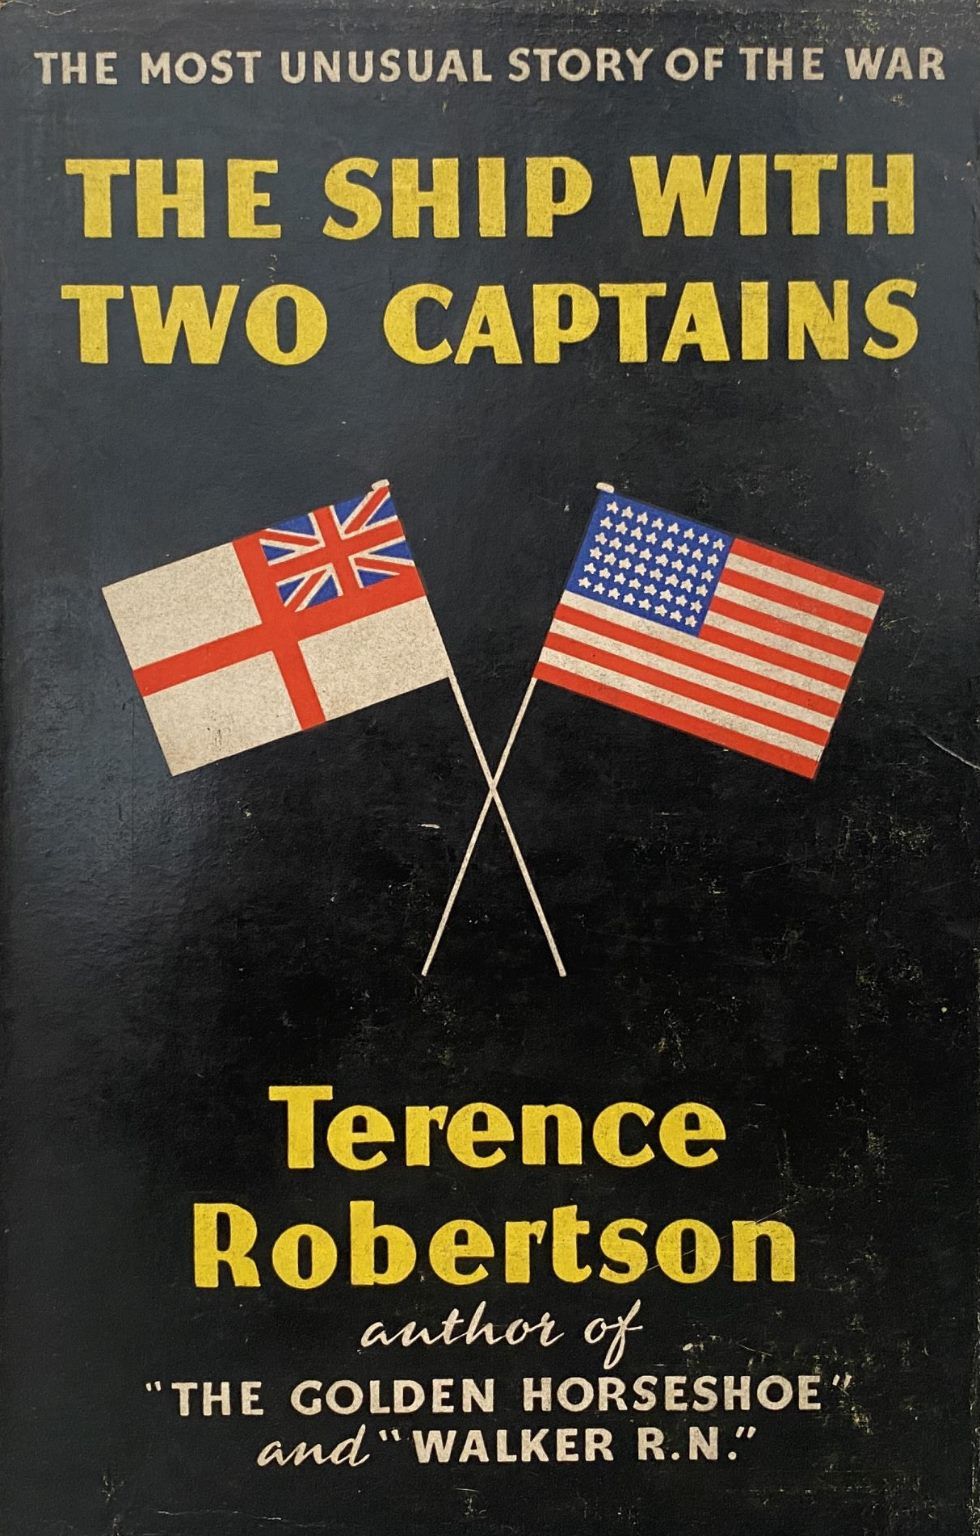 THE SHIP WITH TWO CAPTAINS: The Most Unusual Story of the War